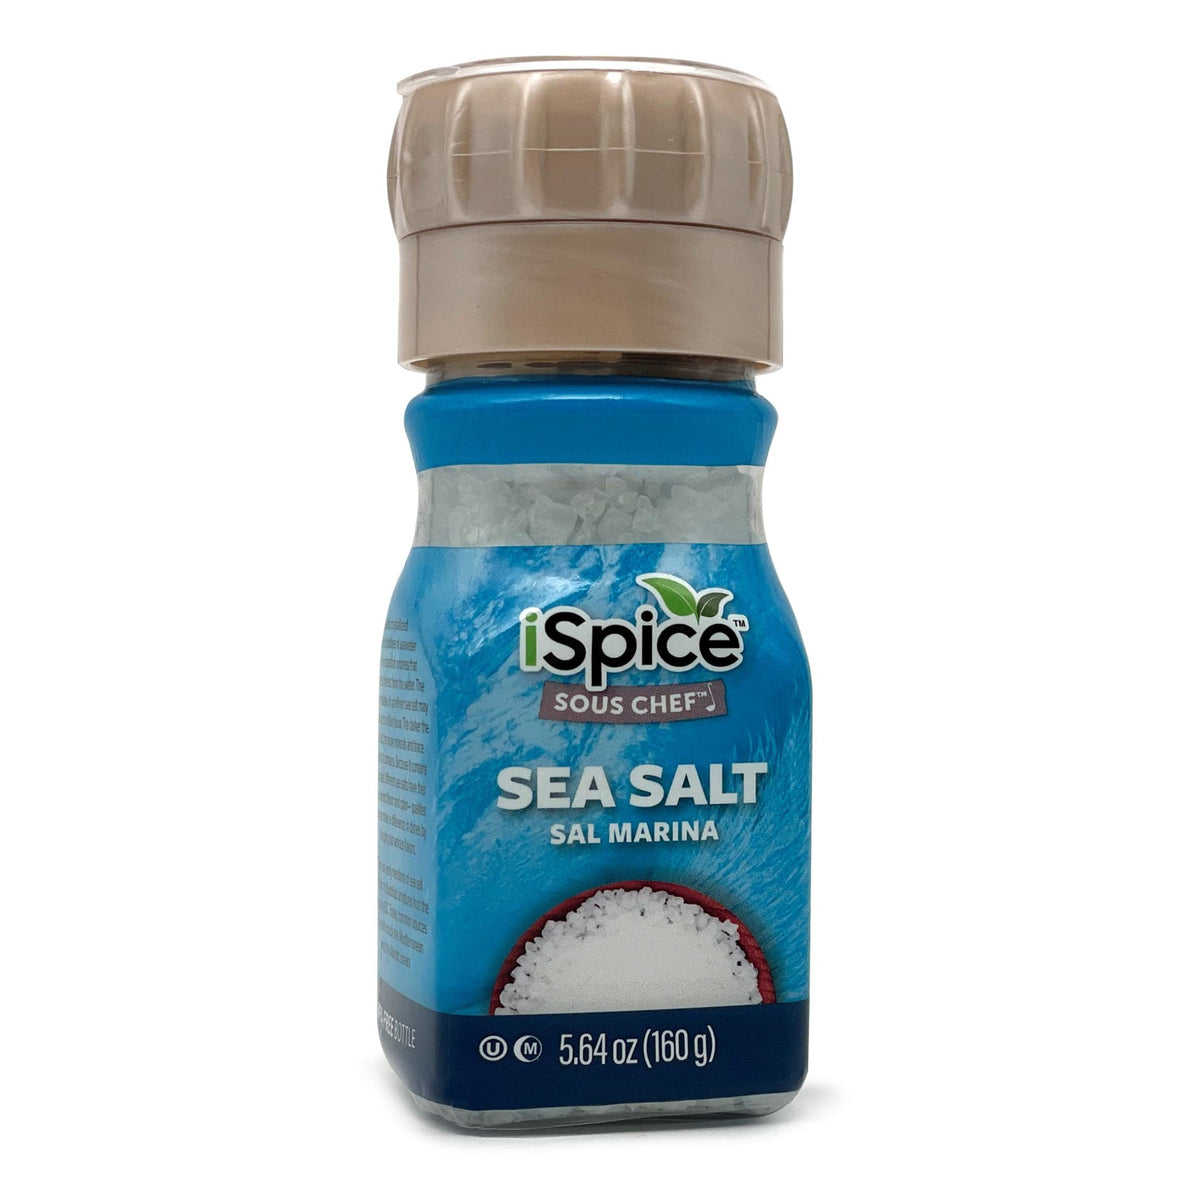 Get the perfect texture with this sea salt grinder! This handy device grinds and dispenses natural sea salt to provide you with freshly ground seasonings every time.